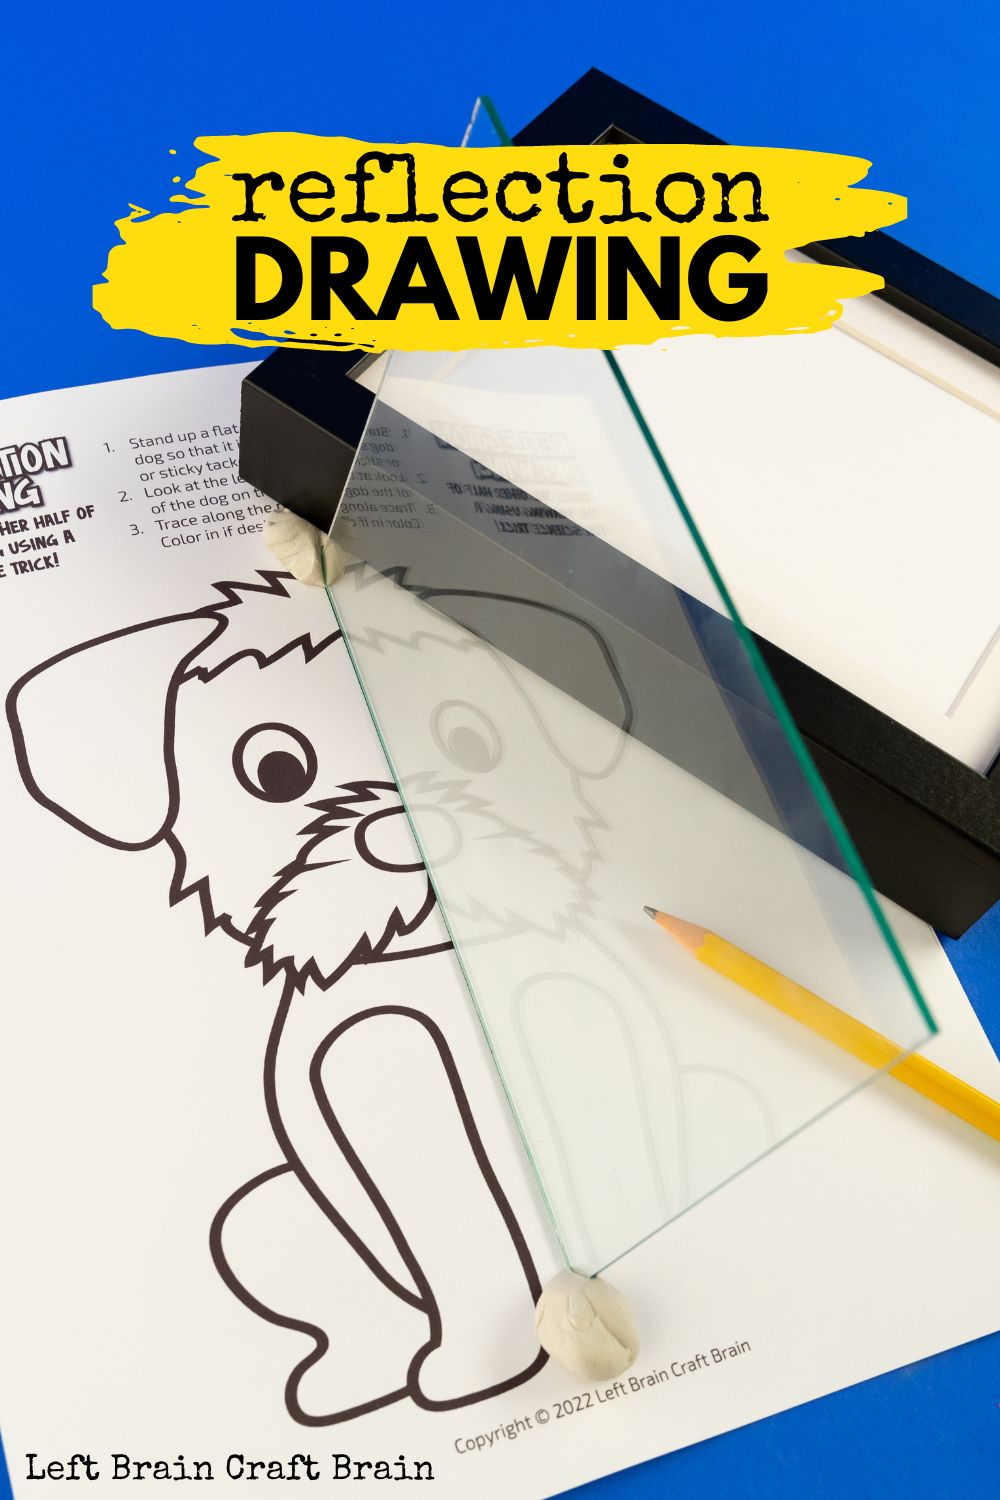 Reflection drawing is a budget-friendly STEAM project. Kids will explore science of sight, symmetry math, plus art.